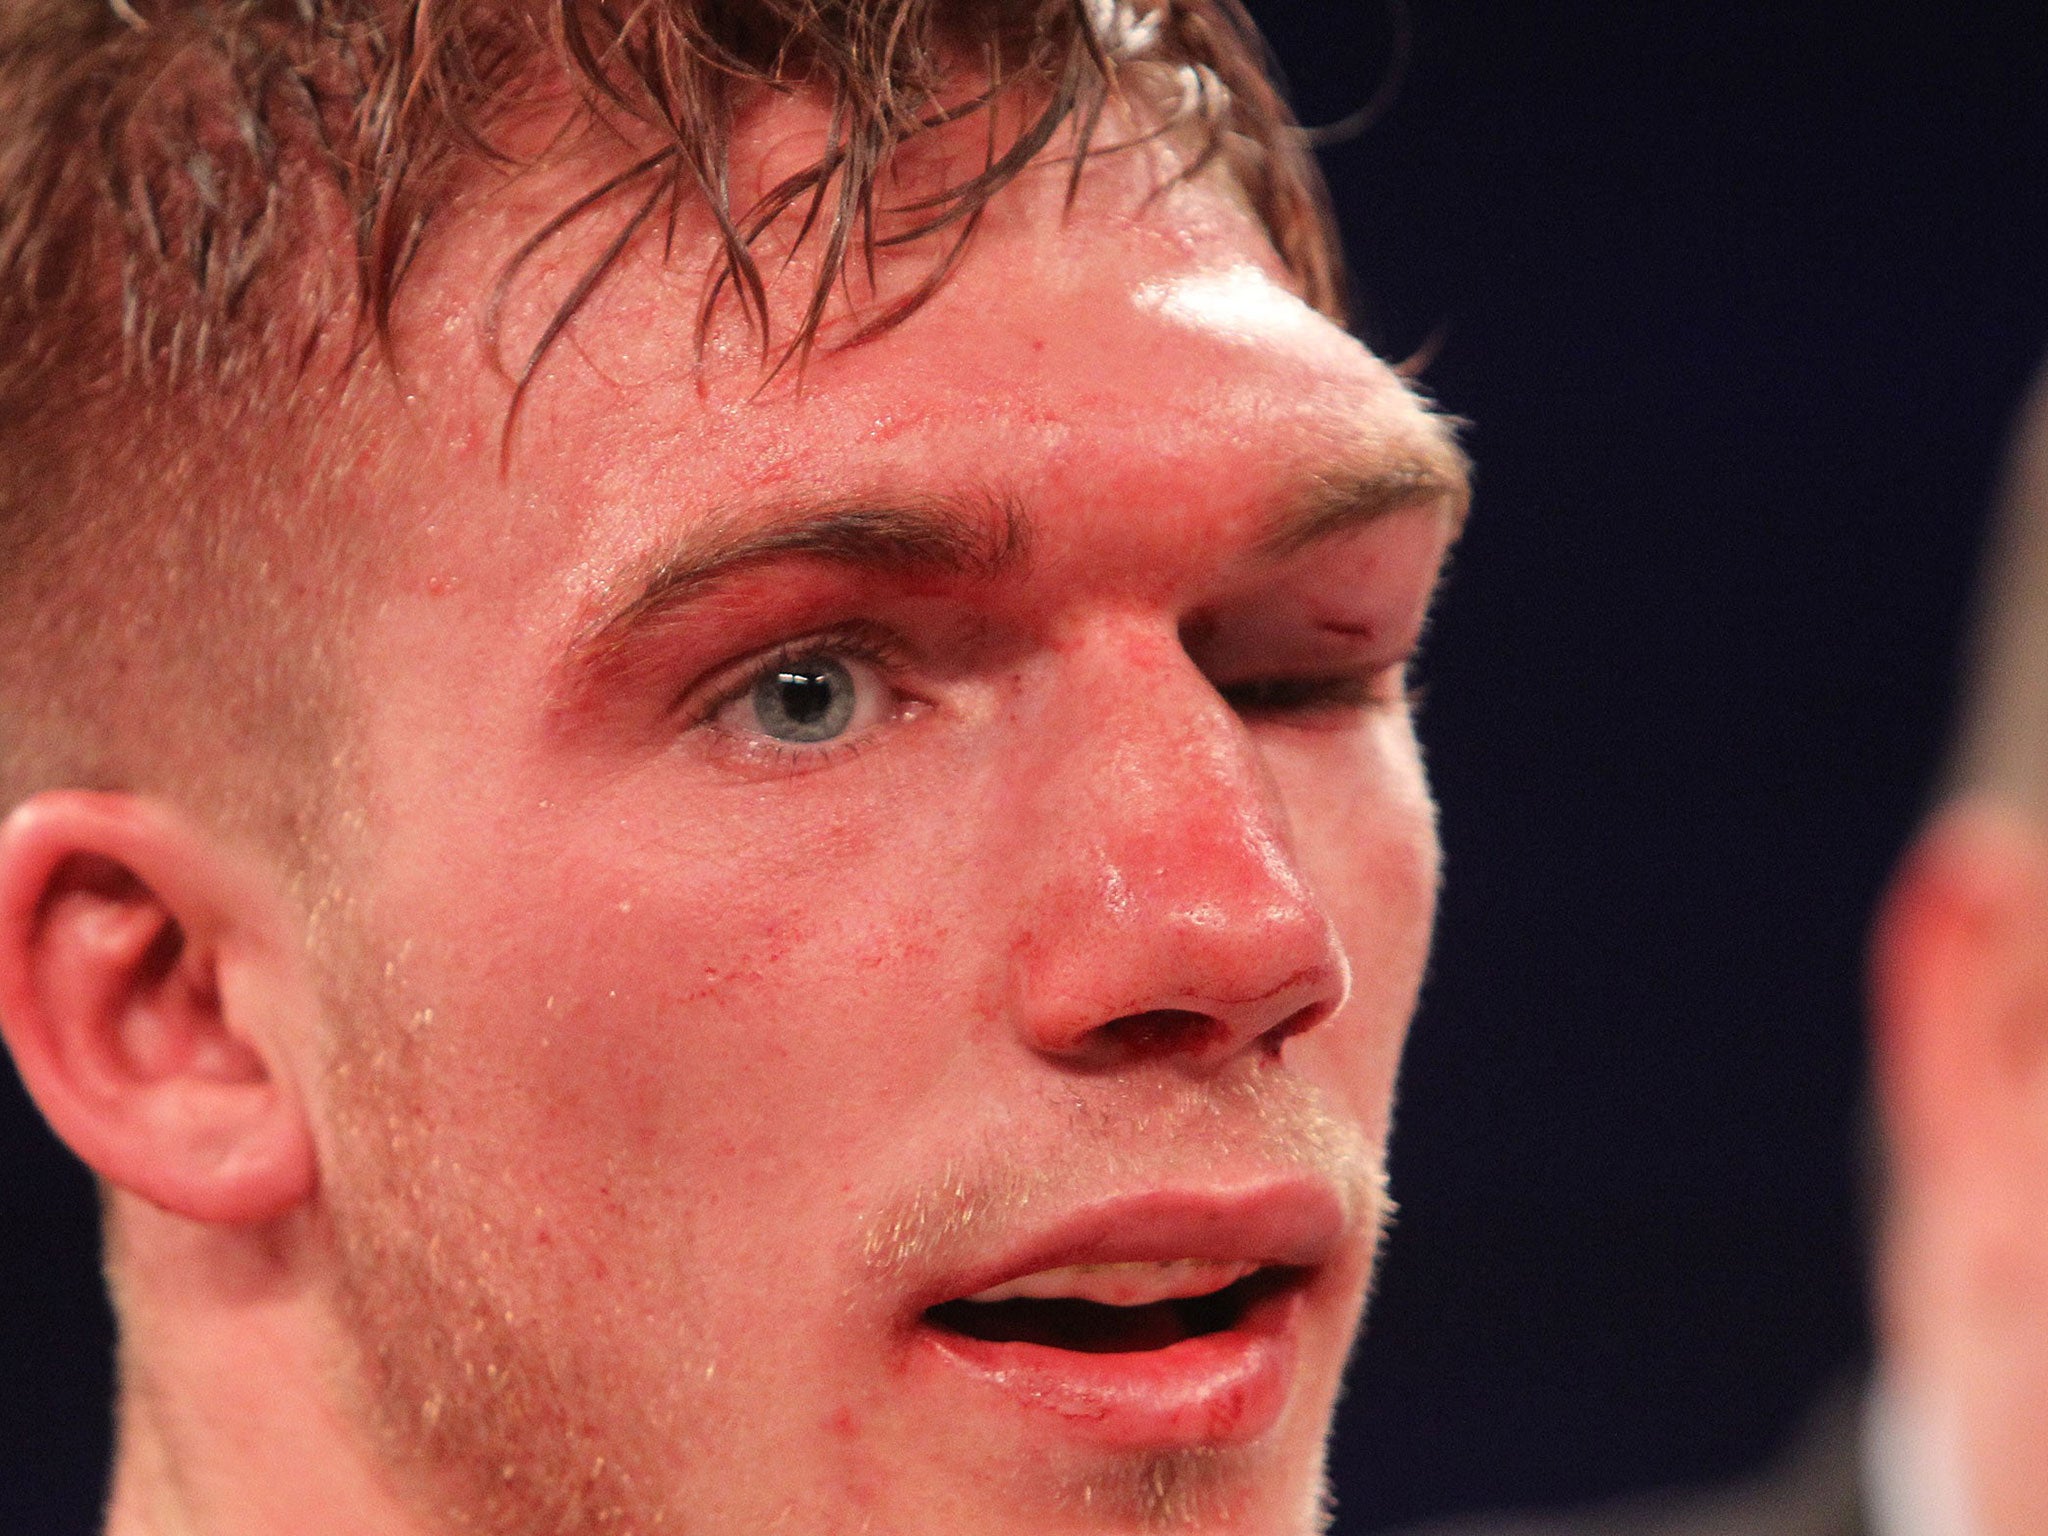 &#13;
The bout was stopped in the tenth round when Blackwell couldn't see out his left eye?(TGSPhoto/Rex Features)&#13;